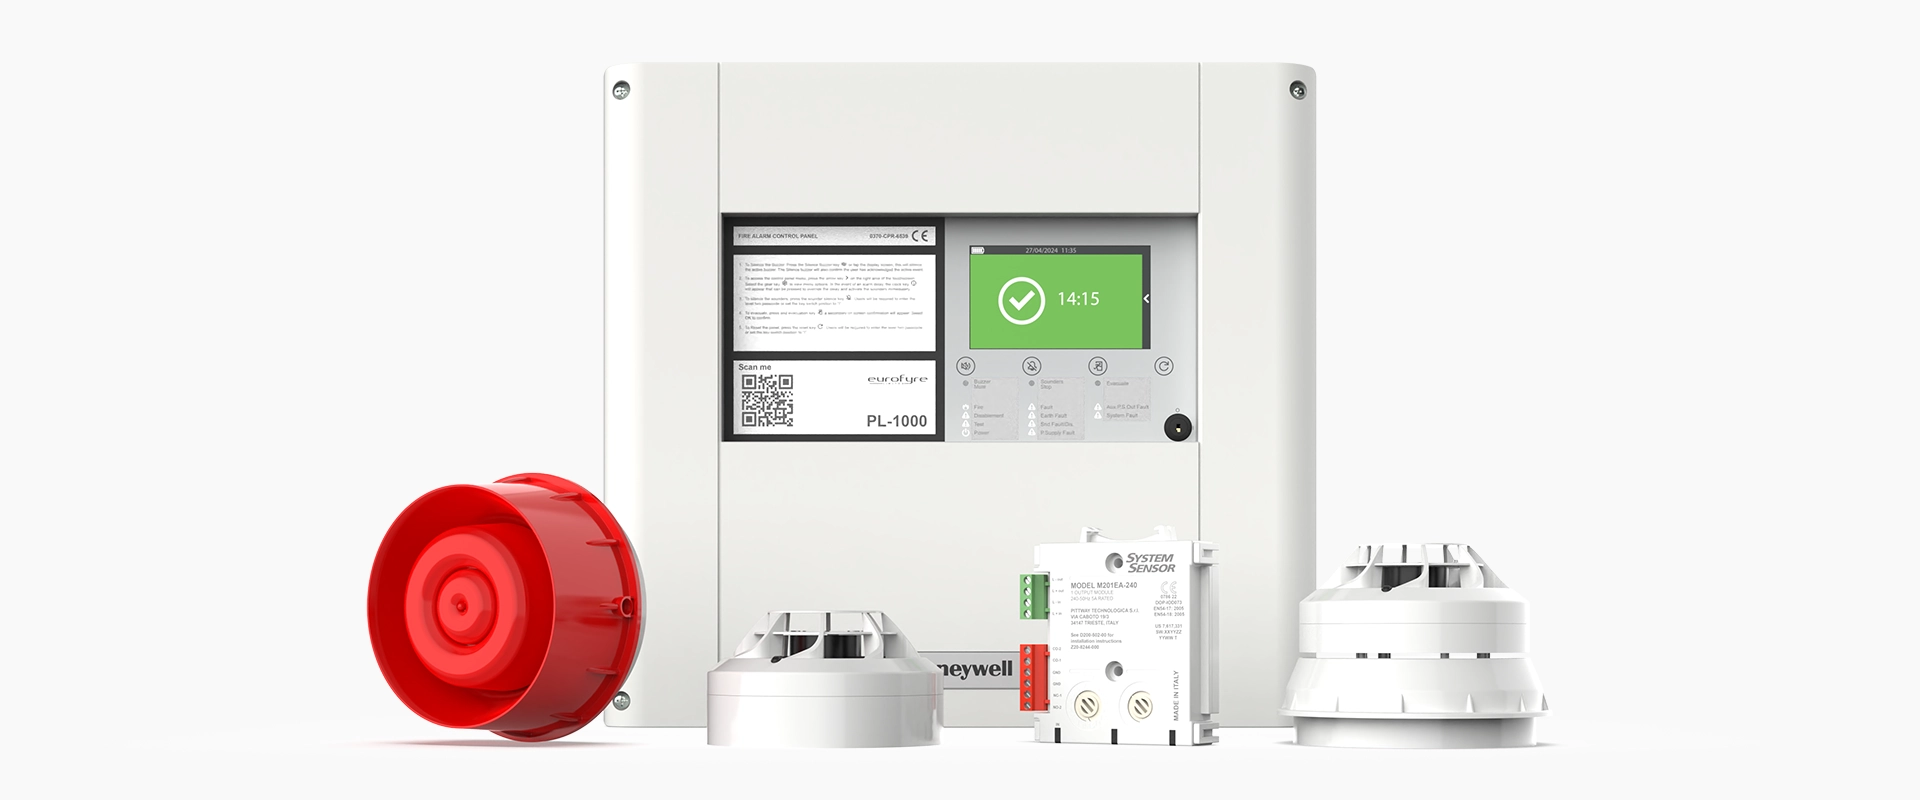 Morley-IAS Plus 1-2 Loop Control Panel together with System Sensor addressable fire detection devices, created by Eurofyre.